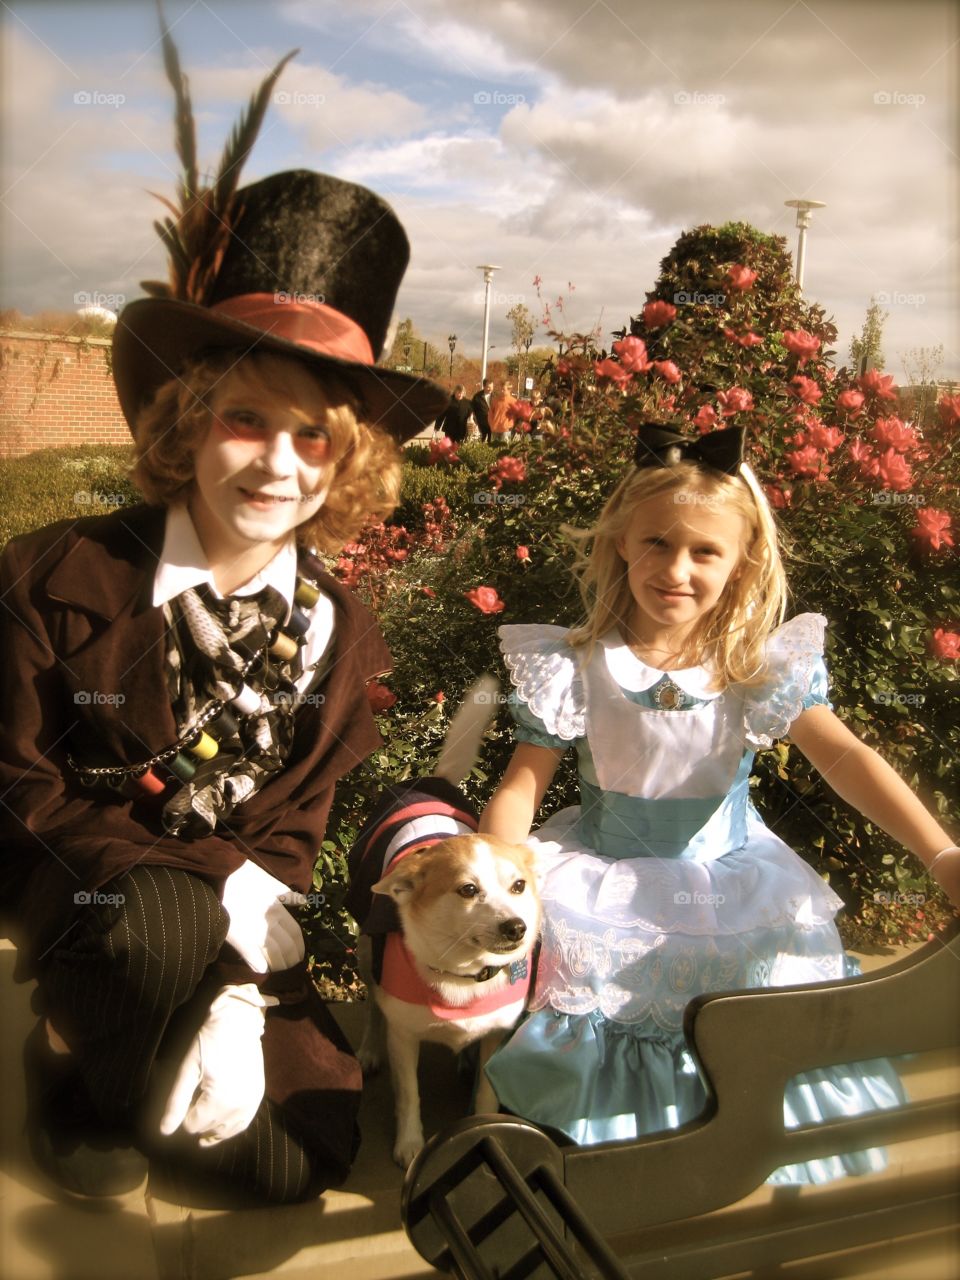 Alice, The Mad Hatter and their dog